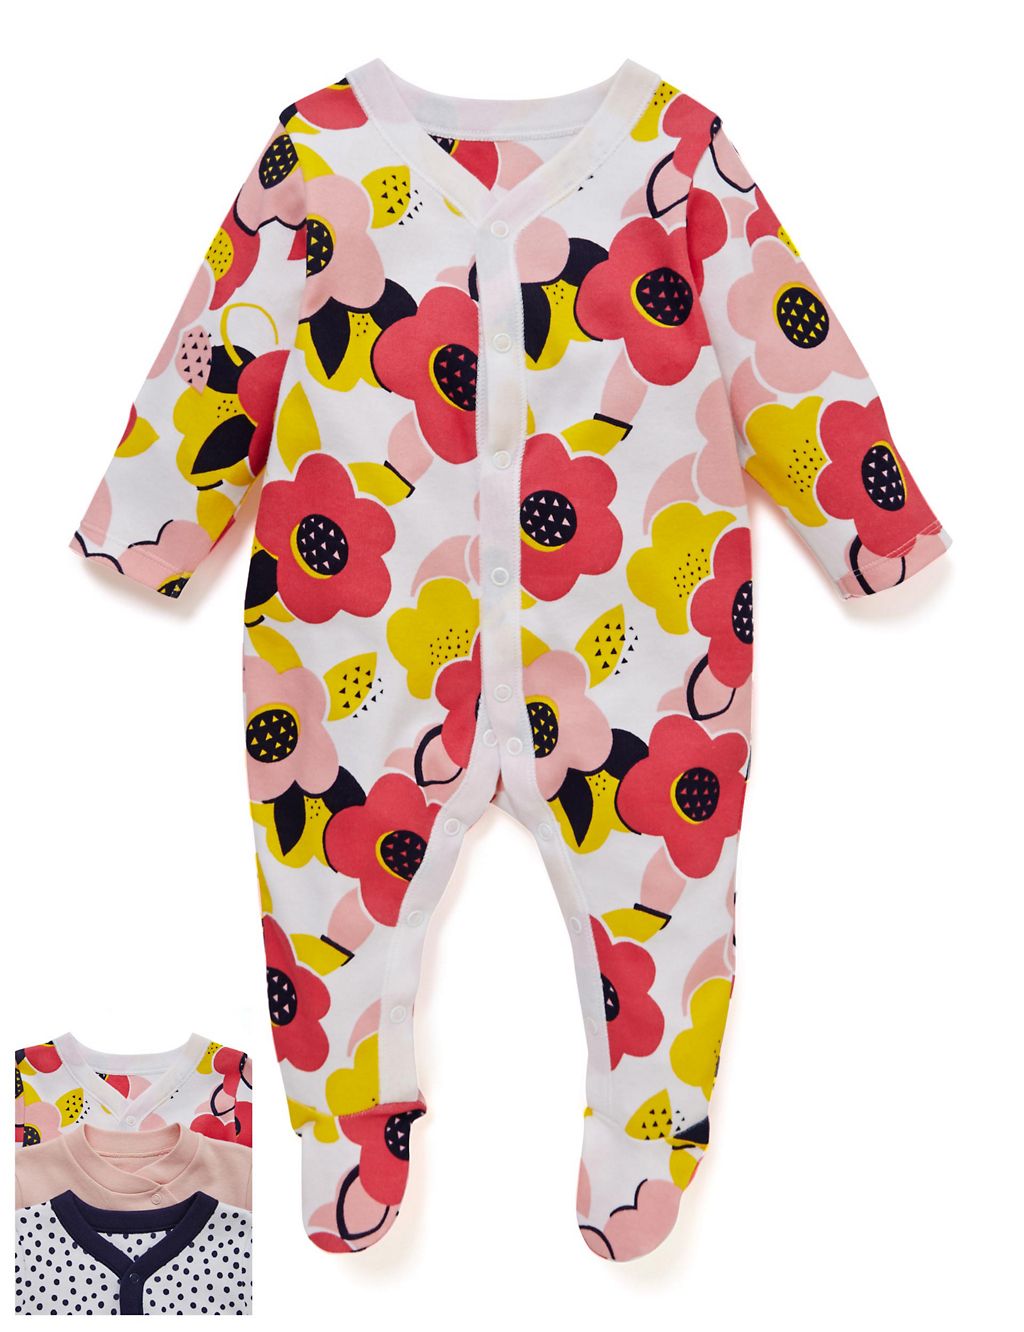 3 Pack Pure Cotton Assorted Sleepsuits 3 of 5